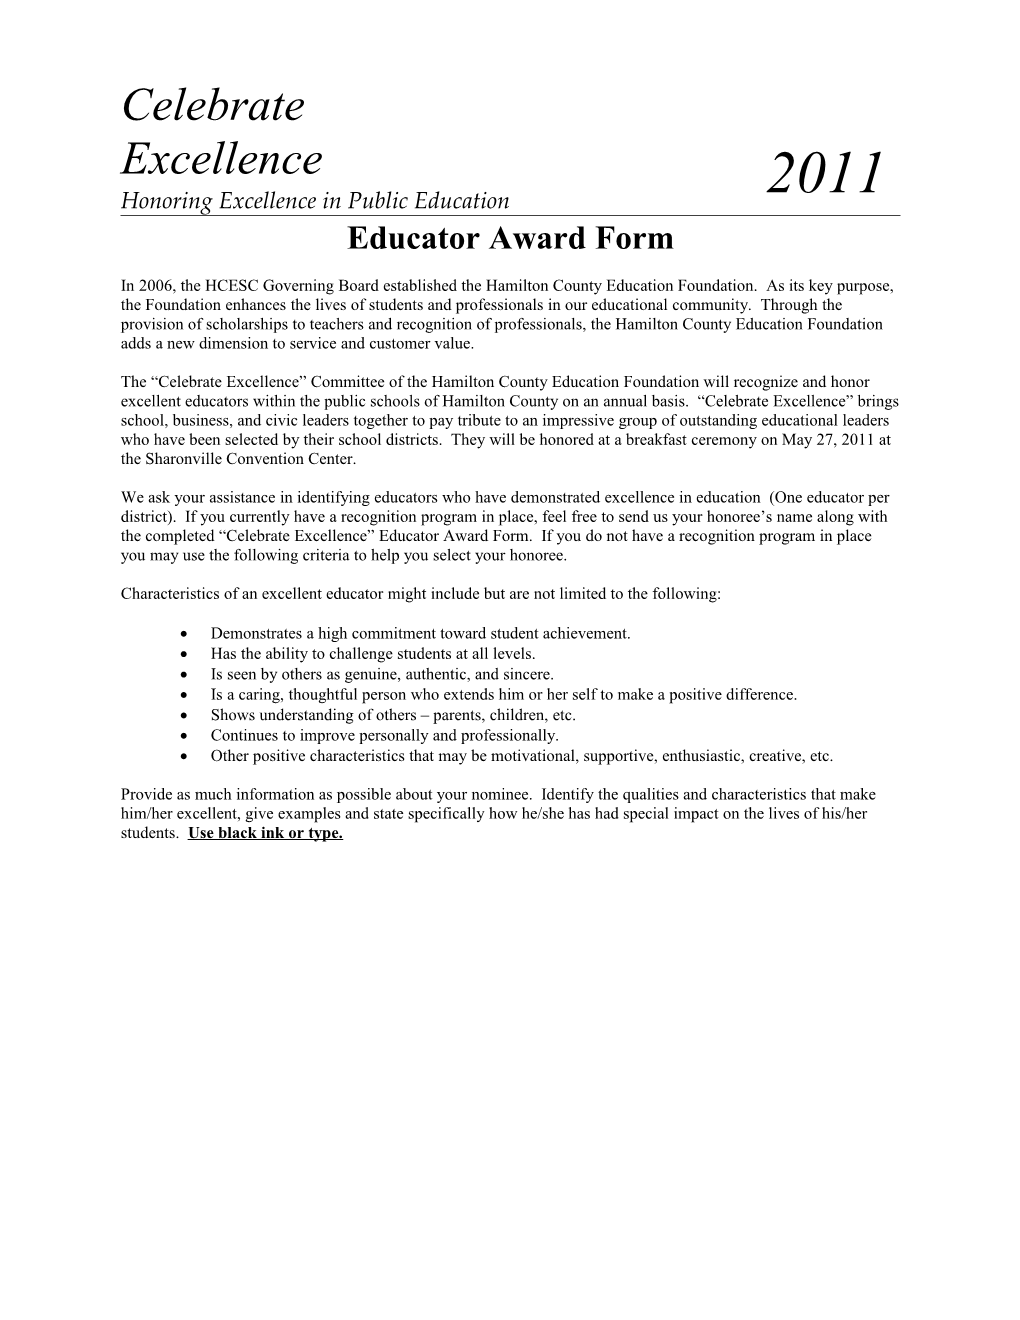 Honoring Excellence in Public Education